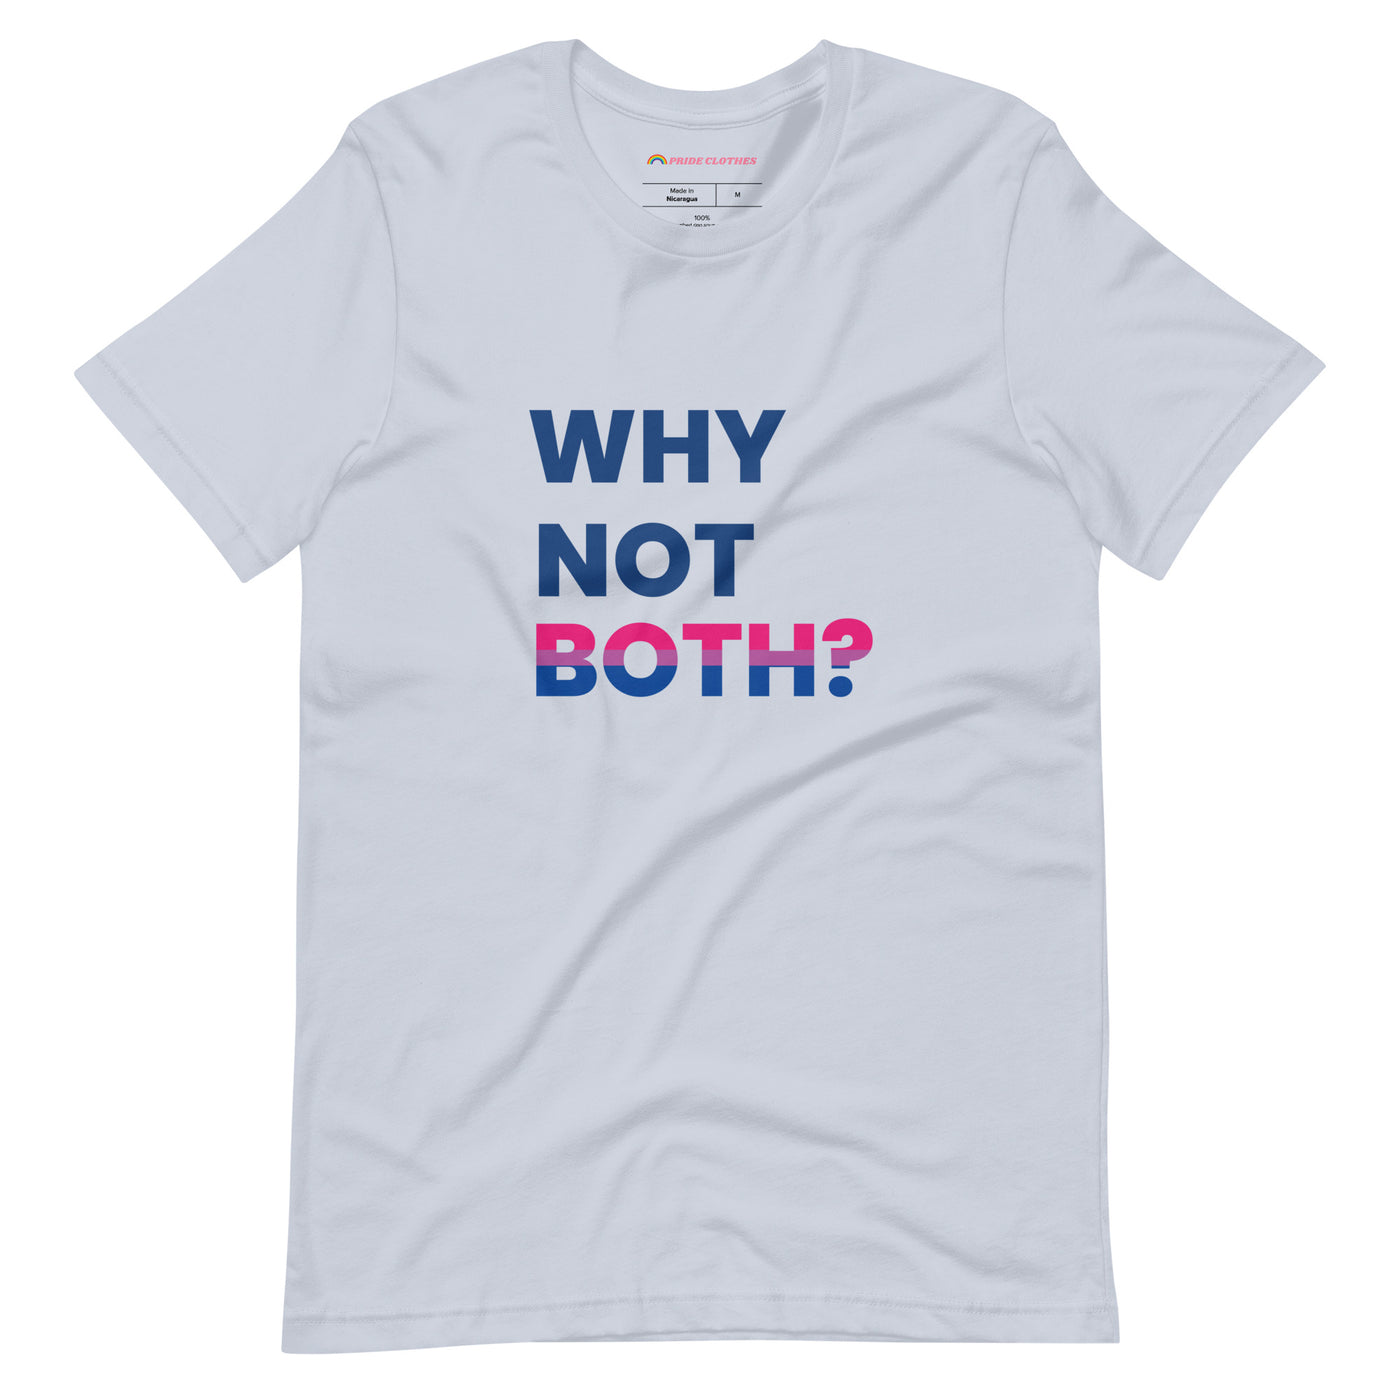 Pride Clothes - Why Limit Yourself to One Why Not Both BI Pride T-Shirt - Light Blue